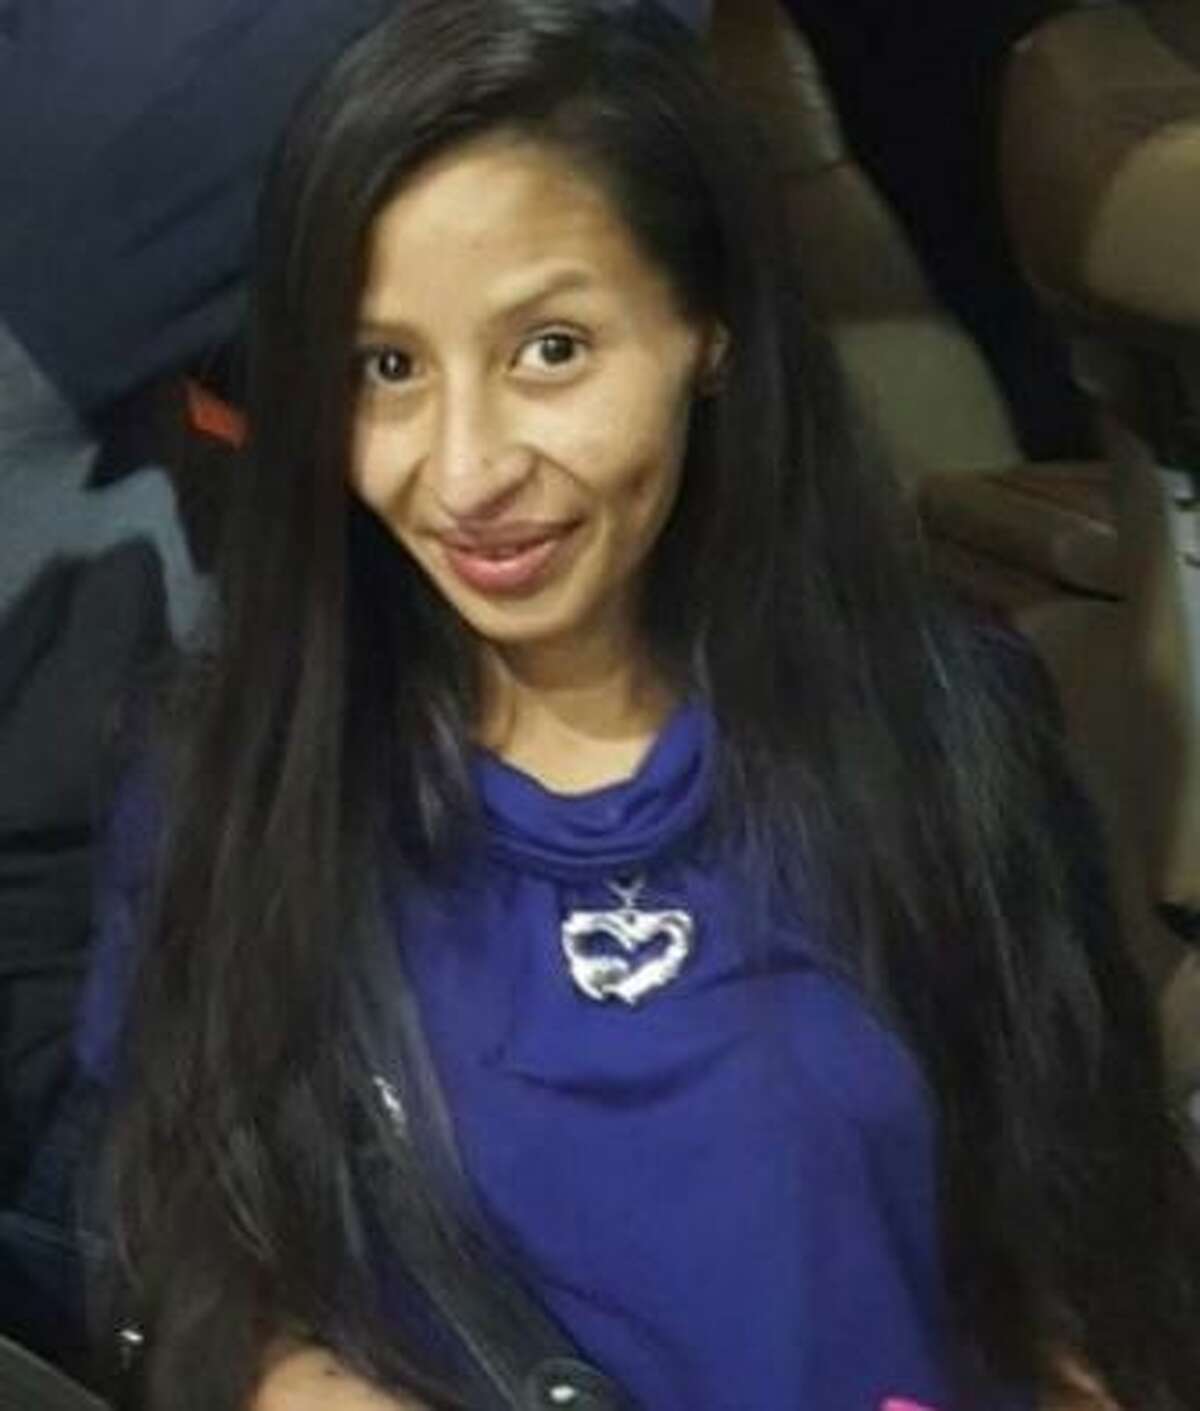 Maria Rodriguez was found dead around 4 p.m. on Dec. 22, 2016, in the bathroom of an apartment at the Jackson Square apartment complex in the 2500 block of Jackson Keller Road.